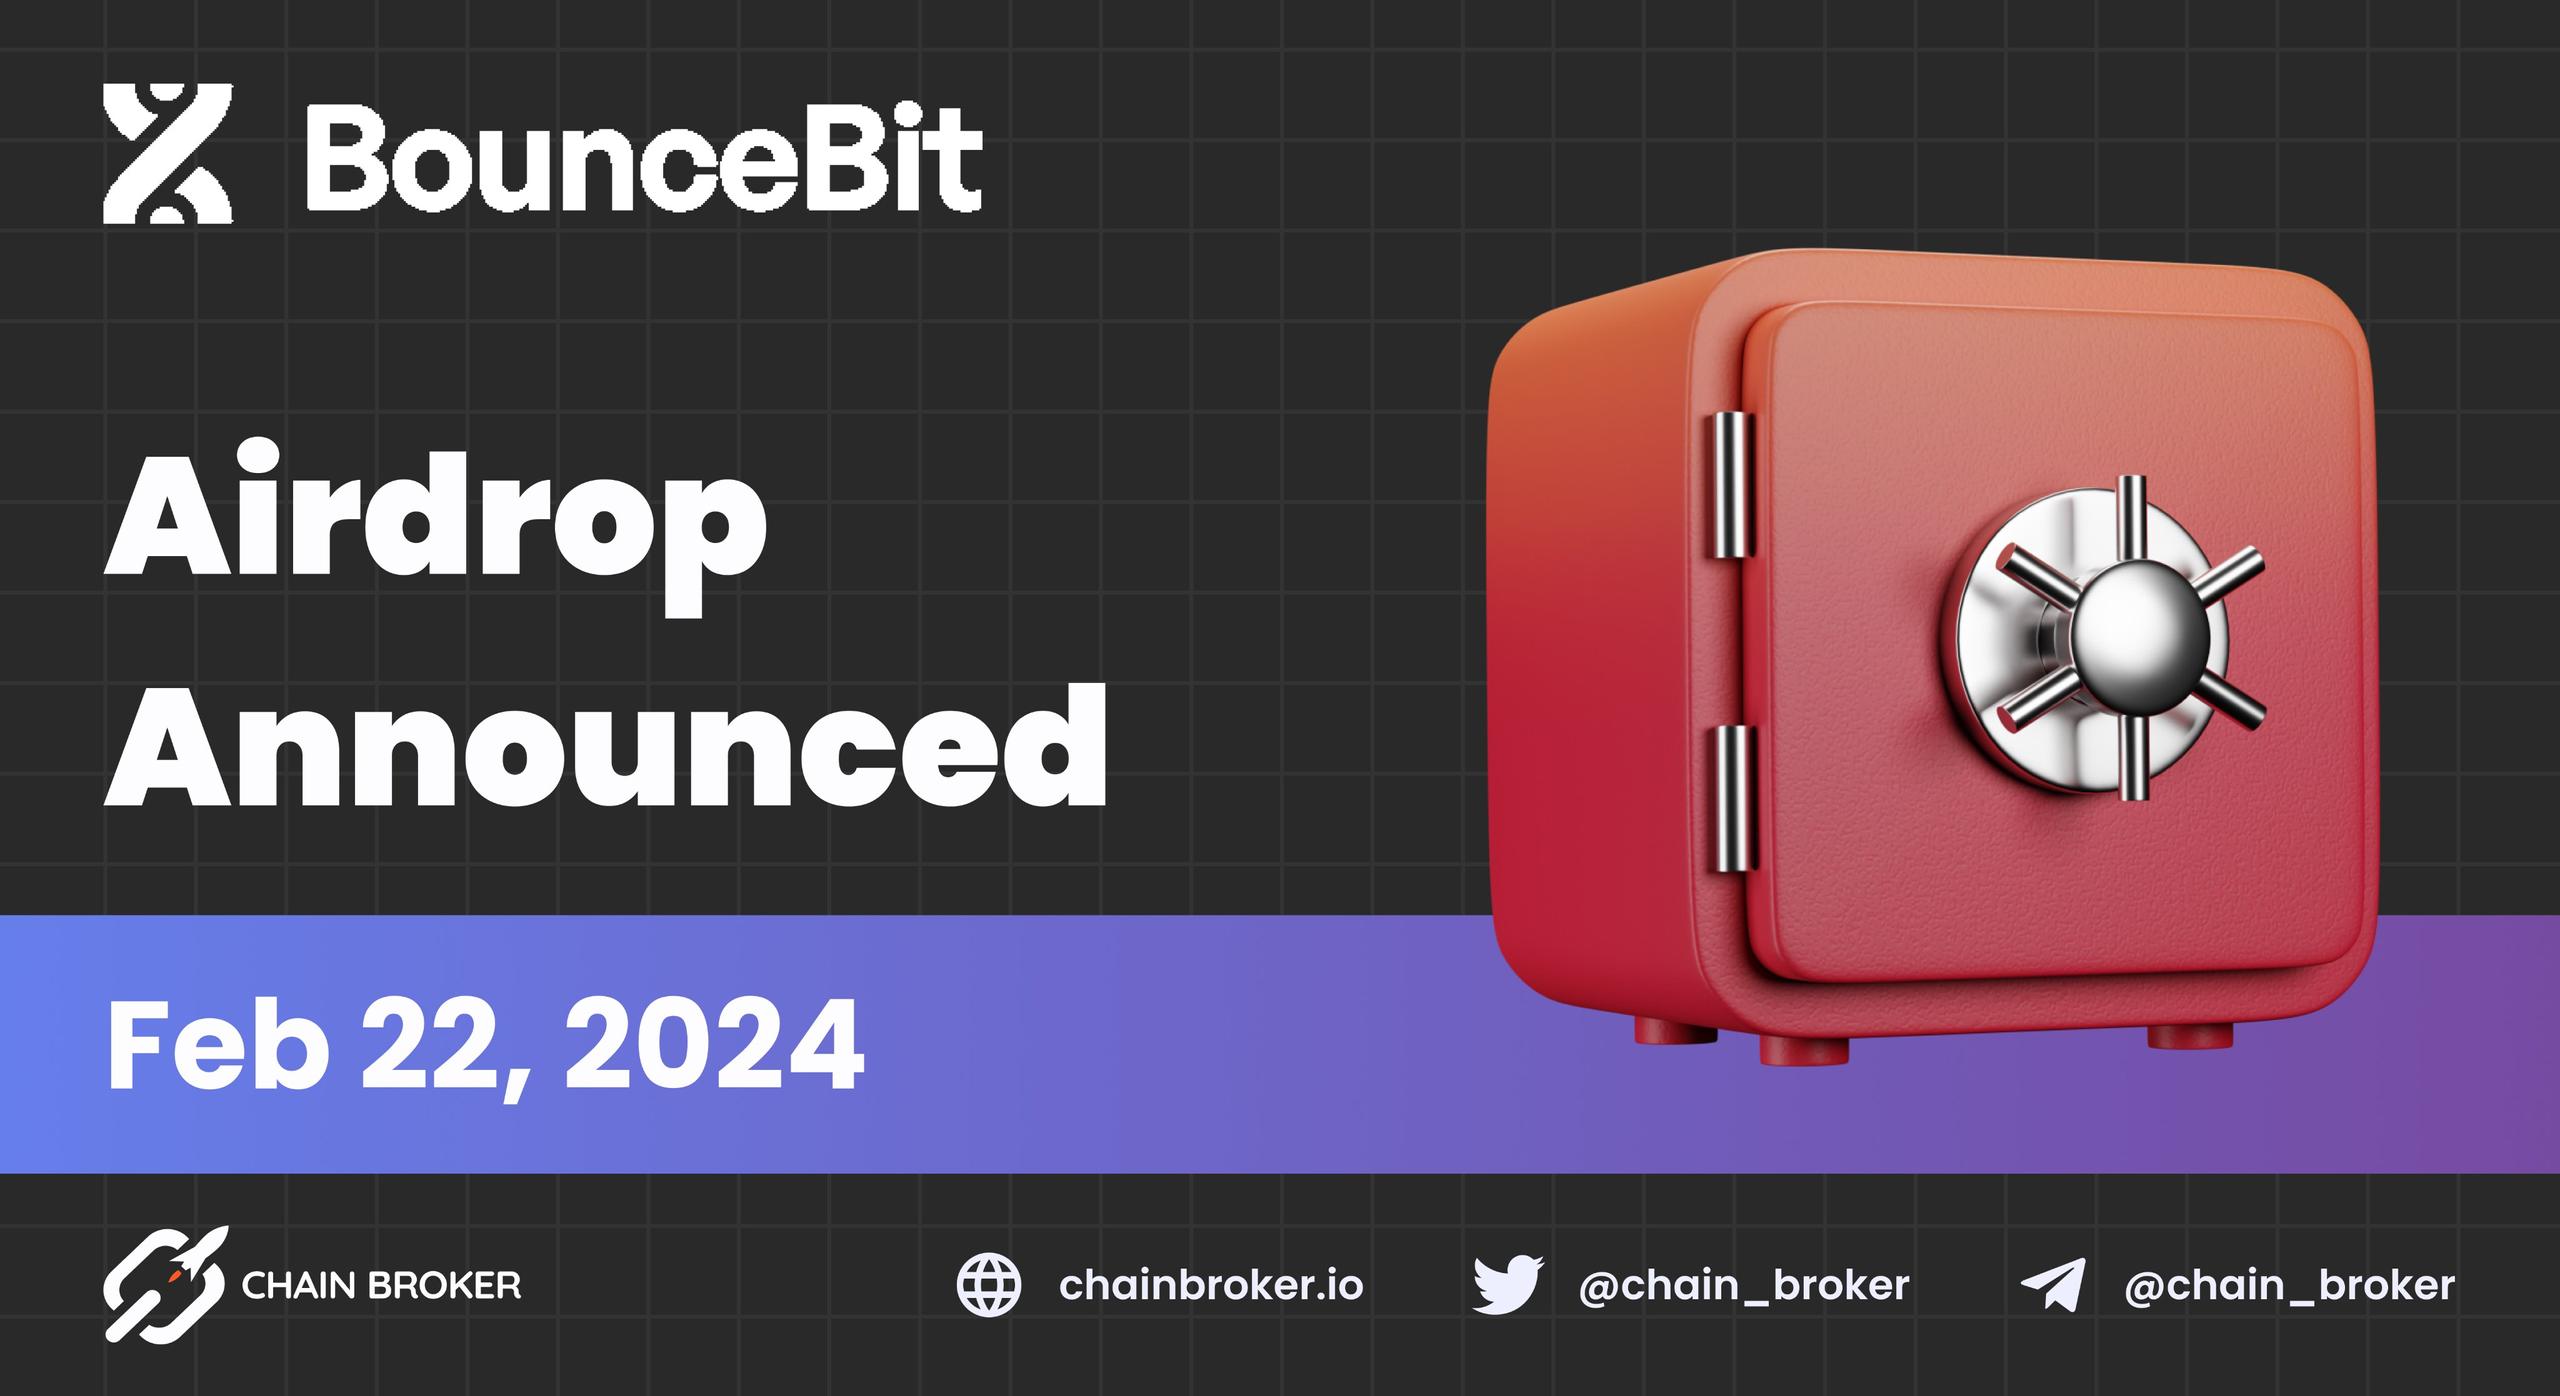 BounceBit launches a Red Pocket Airdrop